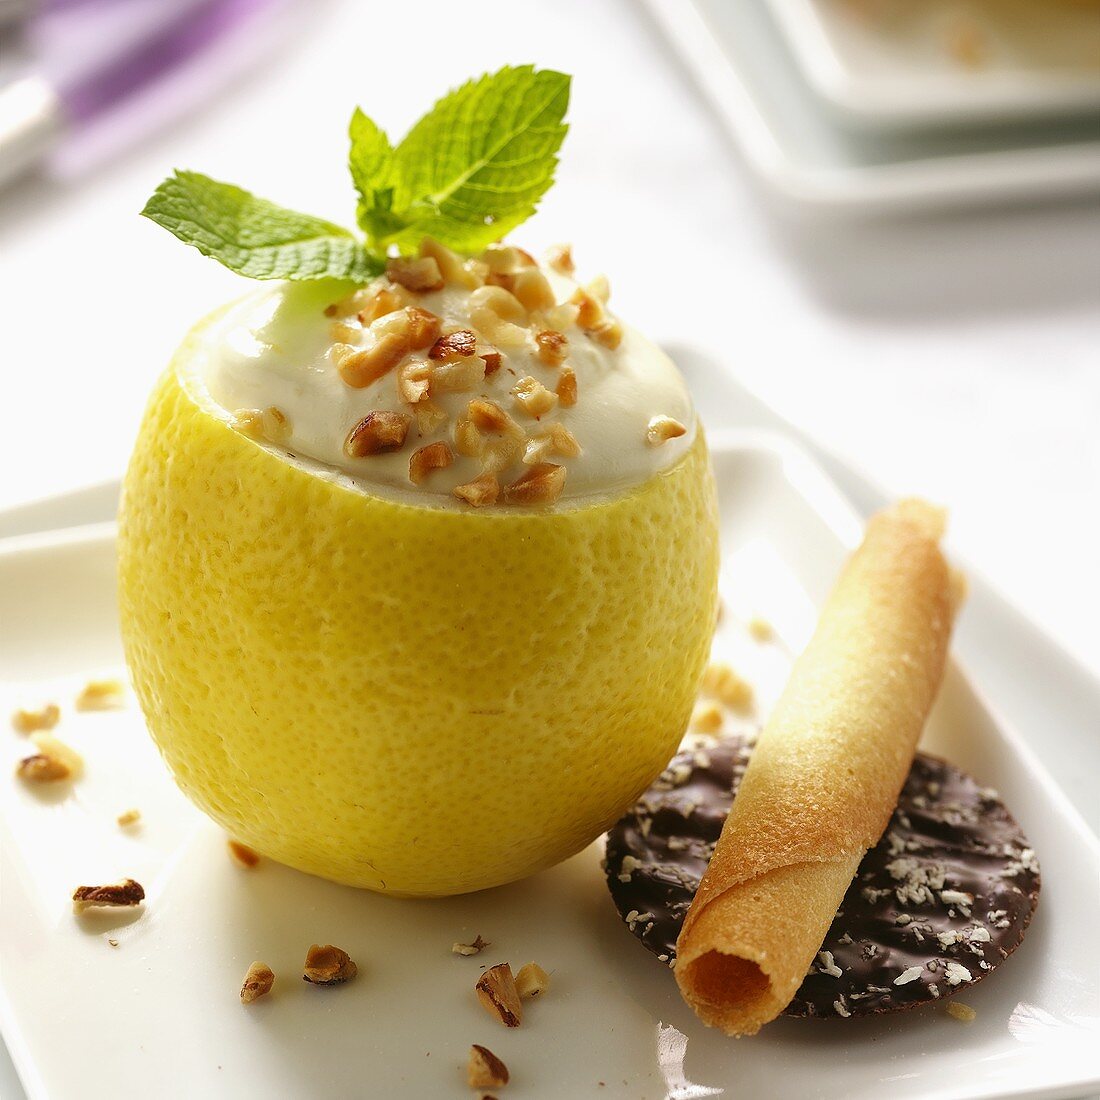 Lemon mousse with almonds in hollowed out lemon